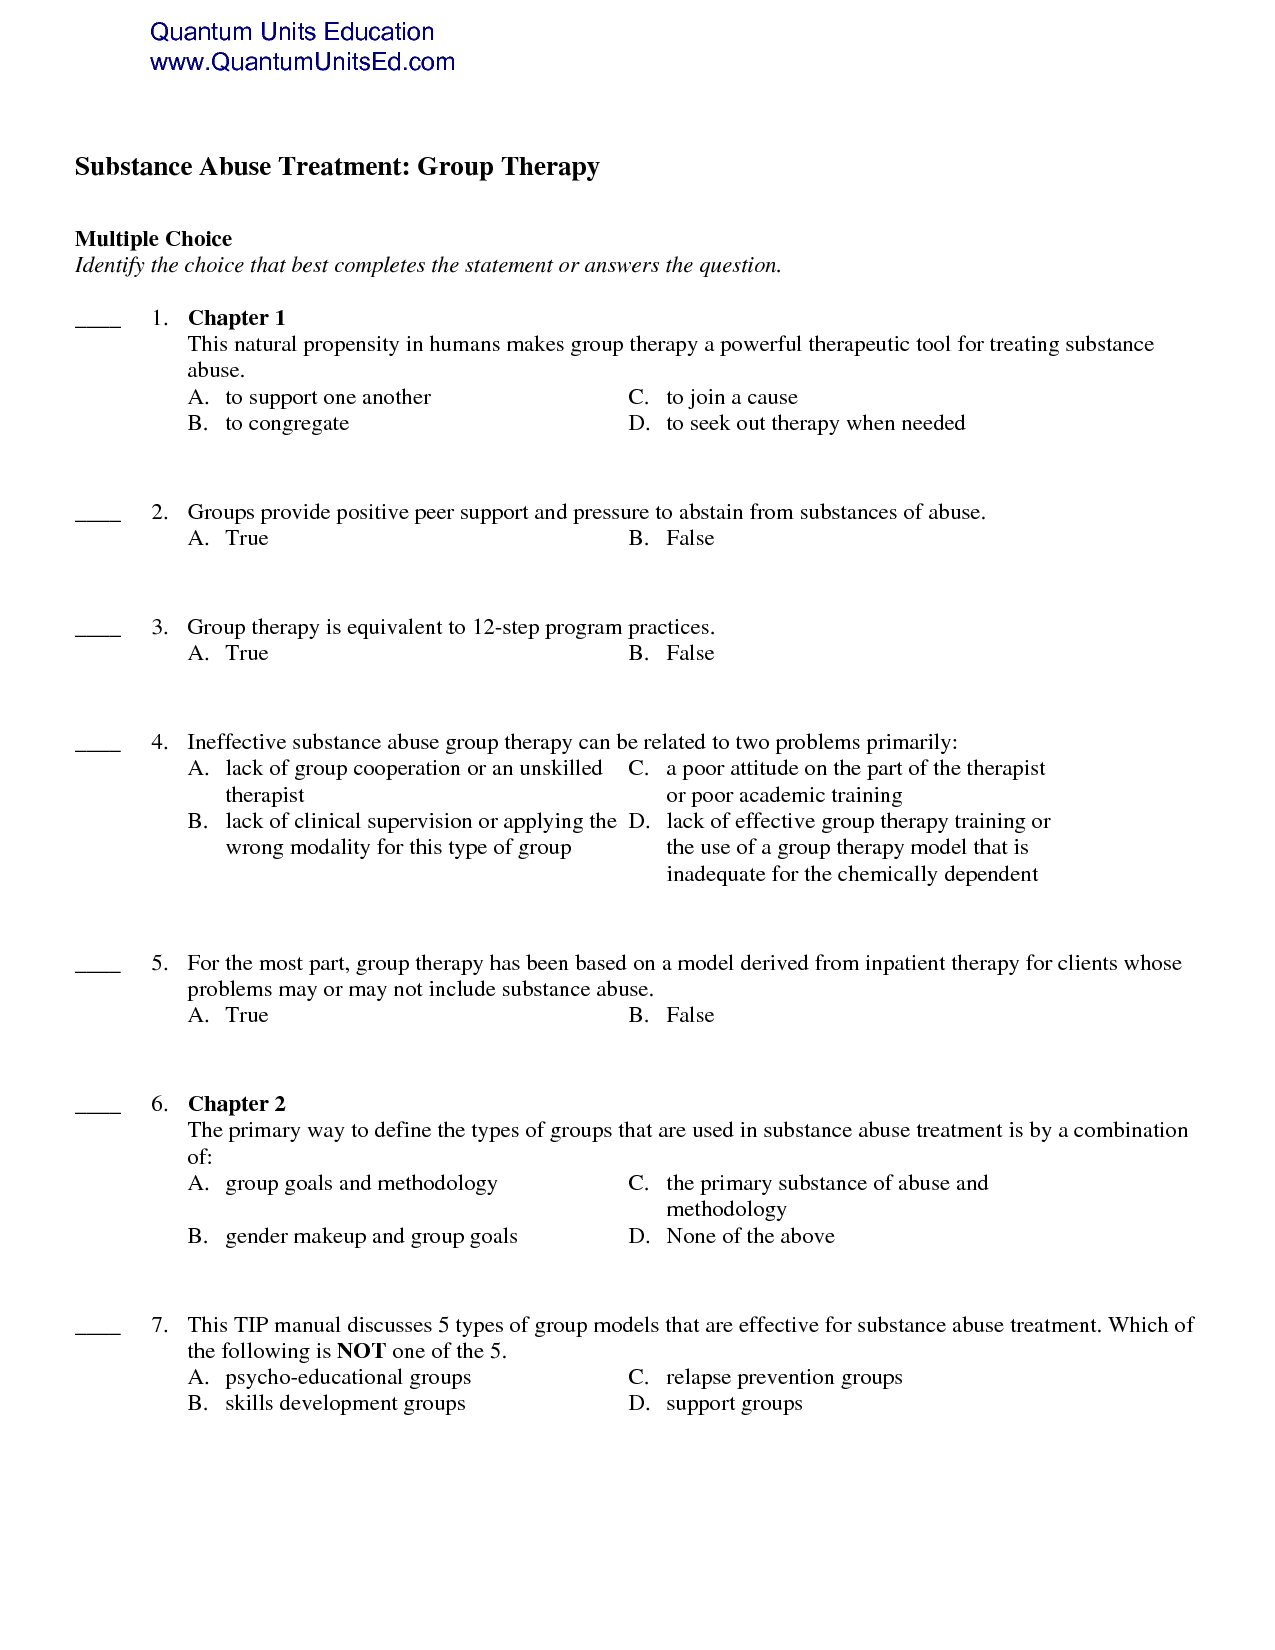 Substance Abuse Group Therapy Worksheets Image